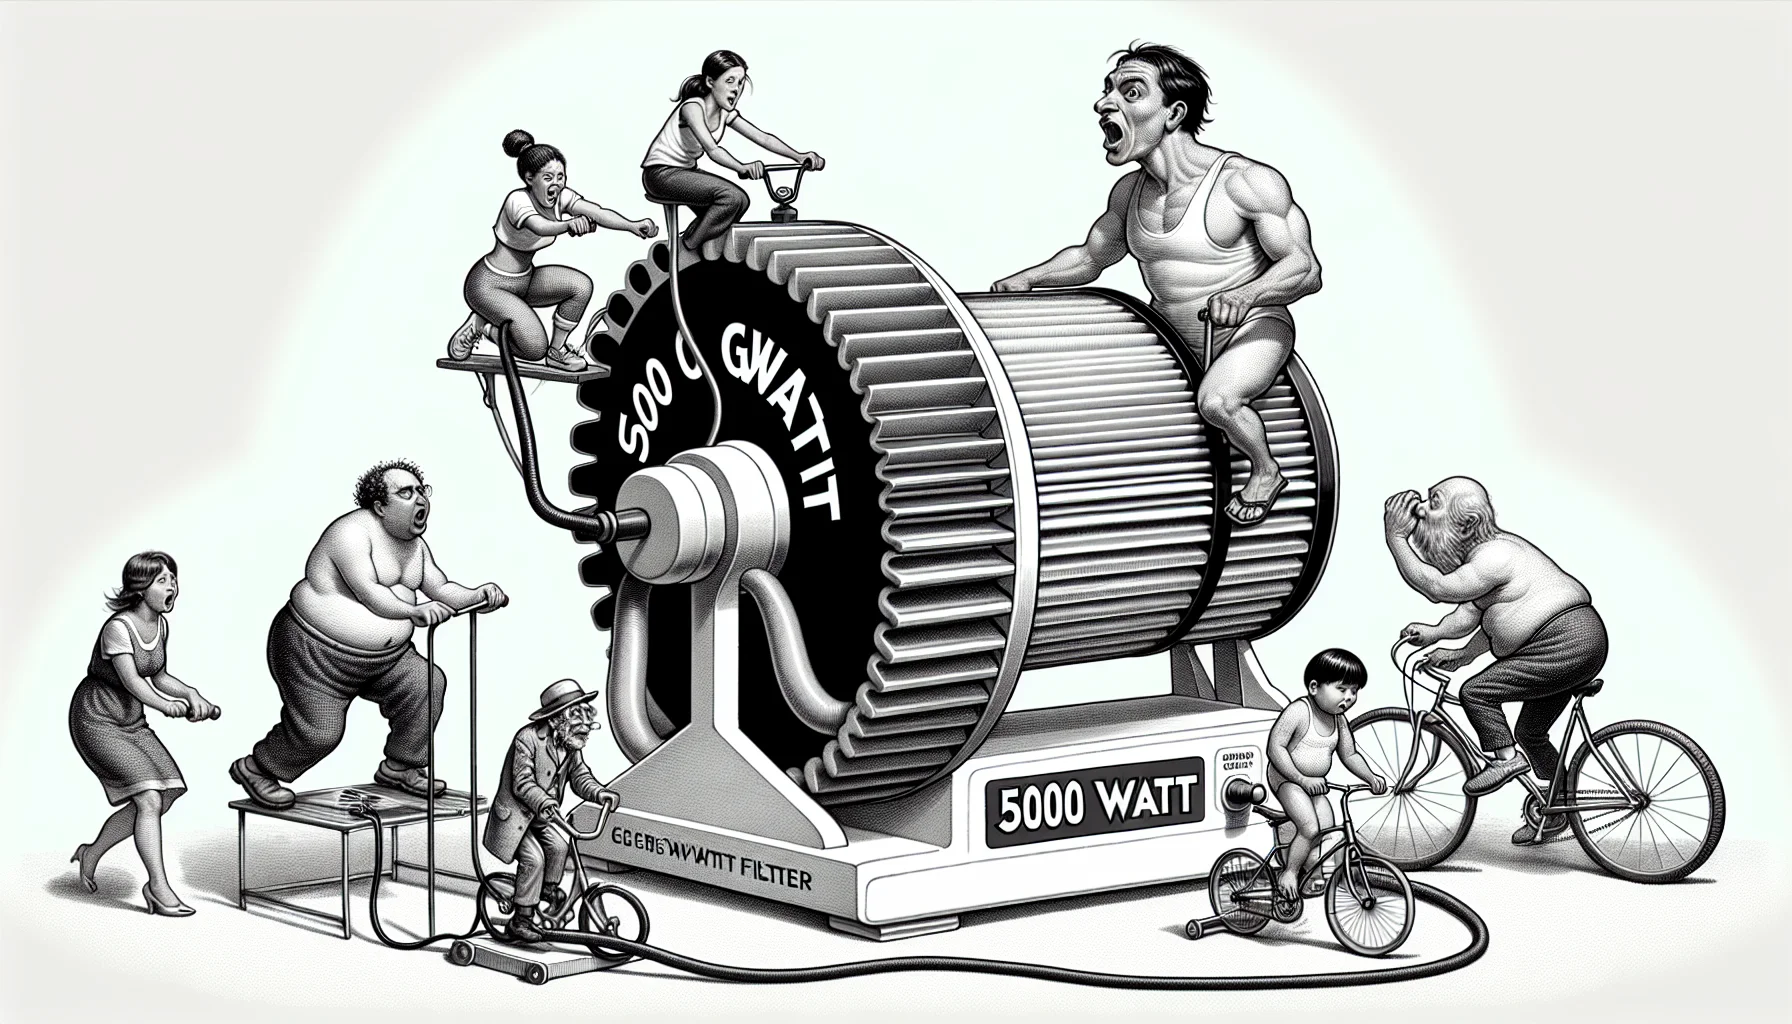 Depict a humourously exaggerated setup featuring a 5000 Watt Filter. Visualize a scenario where a group of diverse individuals are using unexpected, non-traditional ways of generating electricity to power the filter. For example, a Hispanic man could be on a hamster-wheel style treadmill, a Caucasian woman might be pedaling furiously on a bicycle, and a Middle-Eastern child might be turning a giant hand-crank. All their efforts should funnel into the filter, and be sure to convey the fun and laughter surrounding this unusual energy generation session.